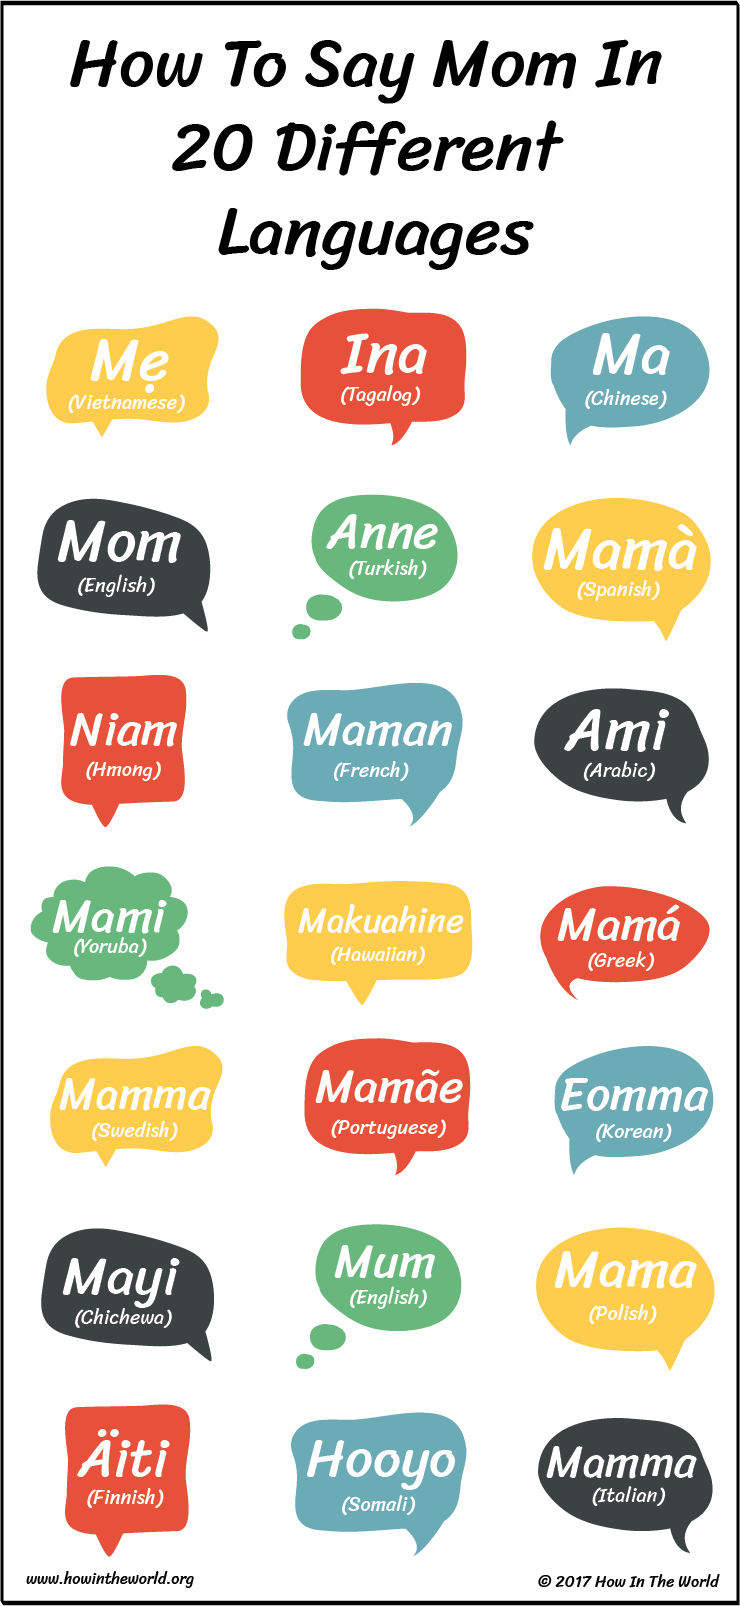 How To Say Mom In 20 Different Languages